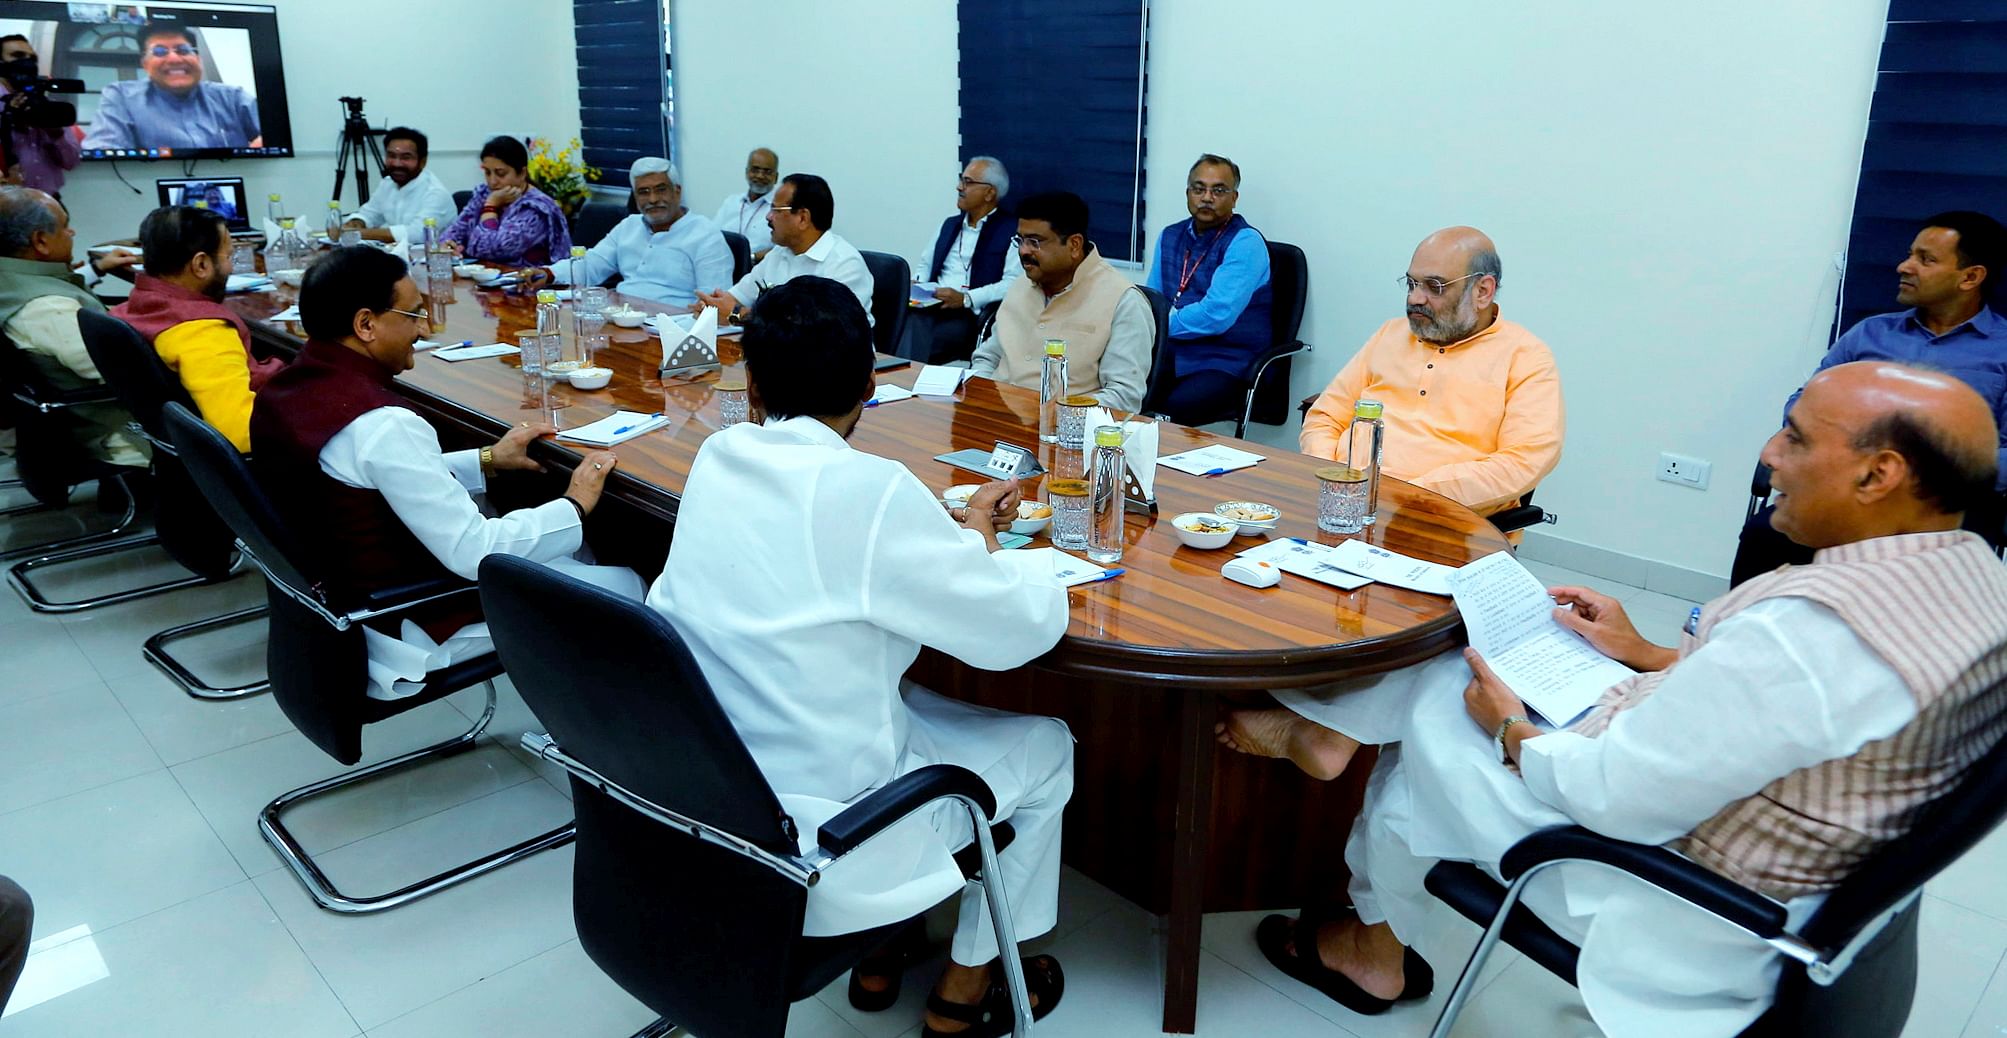 Defence Minister Rajnath Singh chairs a meeting of Group of Ministers to review measures undertaken to fight COVID-19, in New Delhi. (PTI Photo)